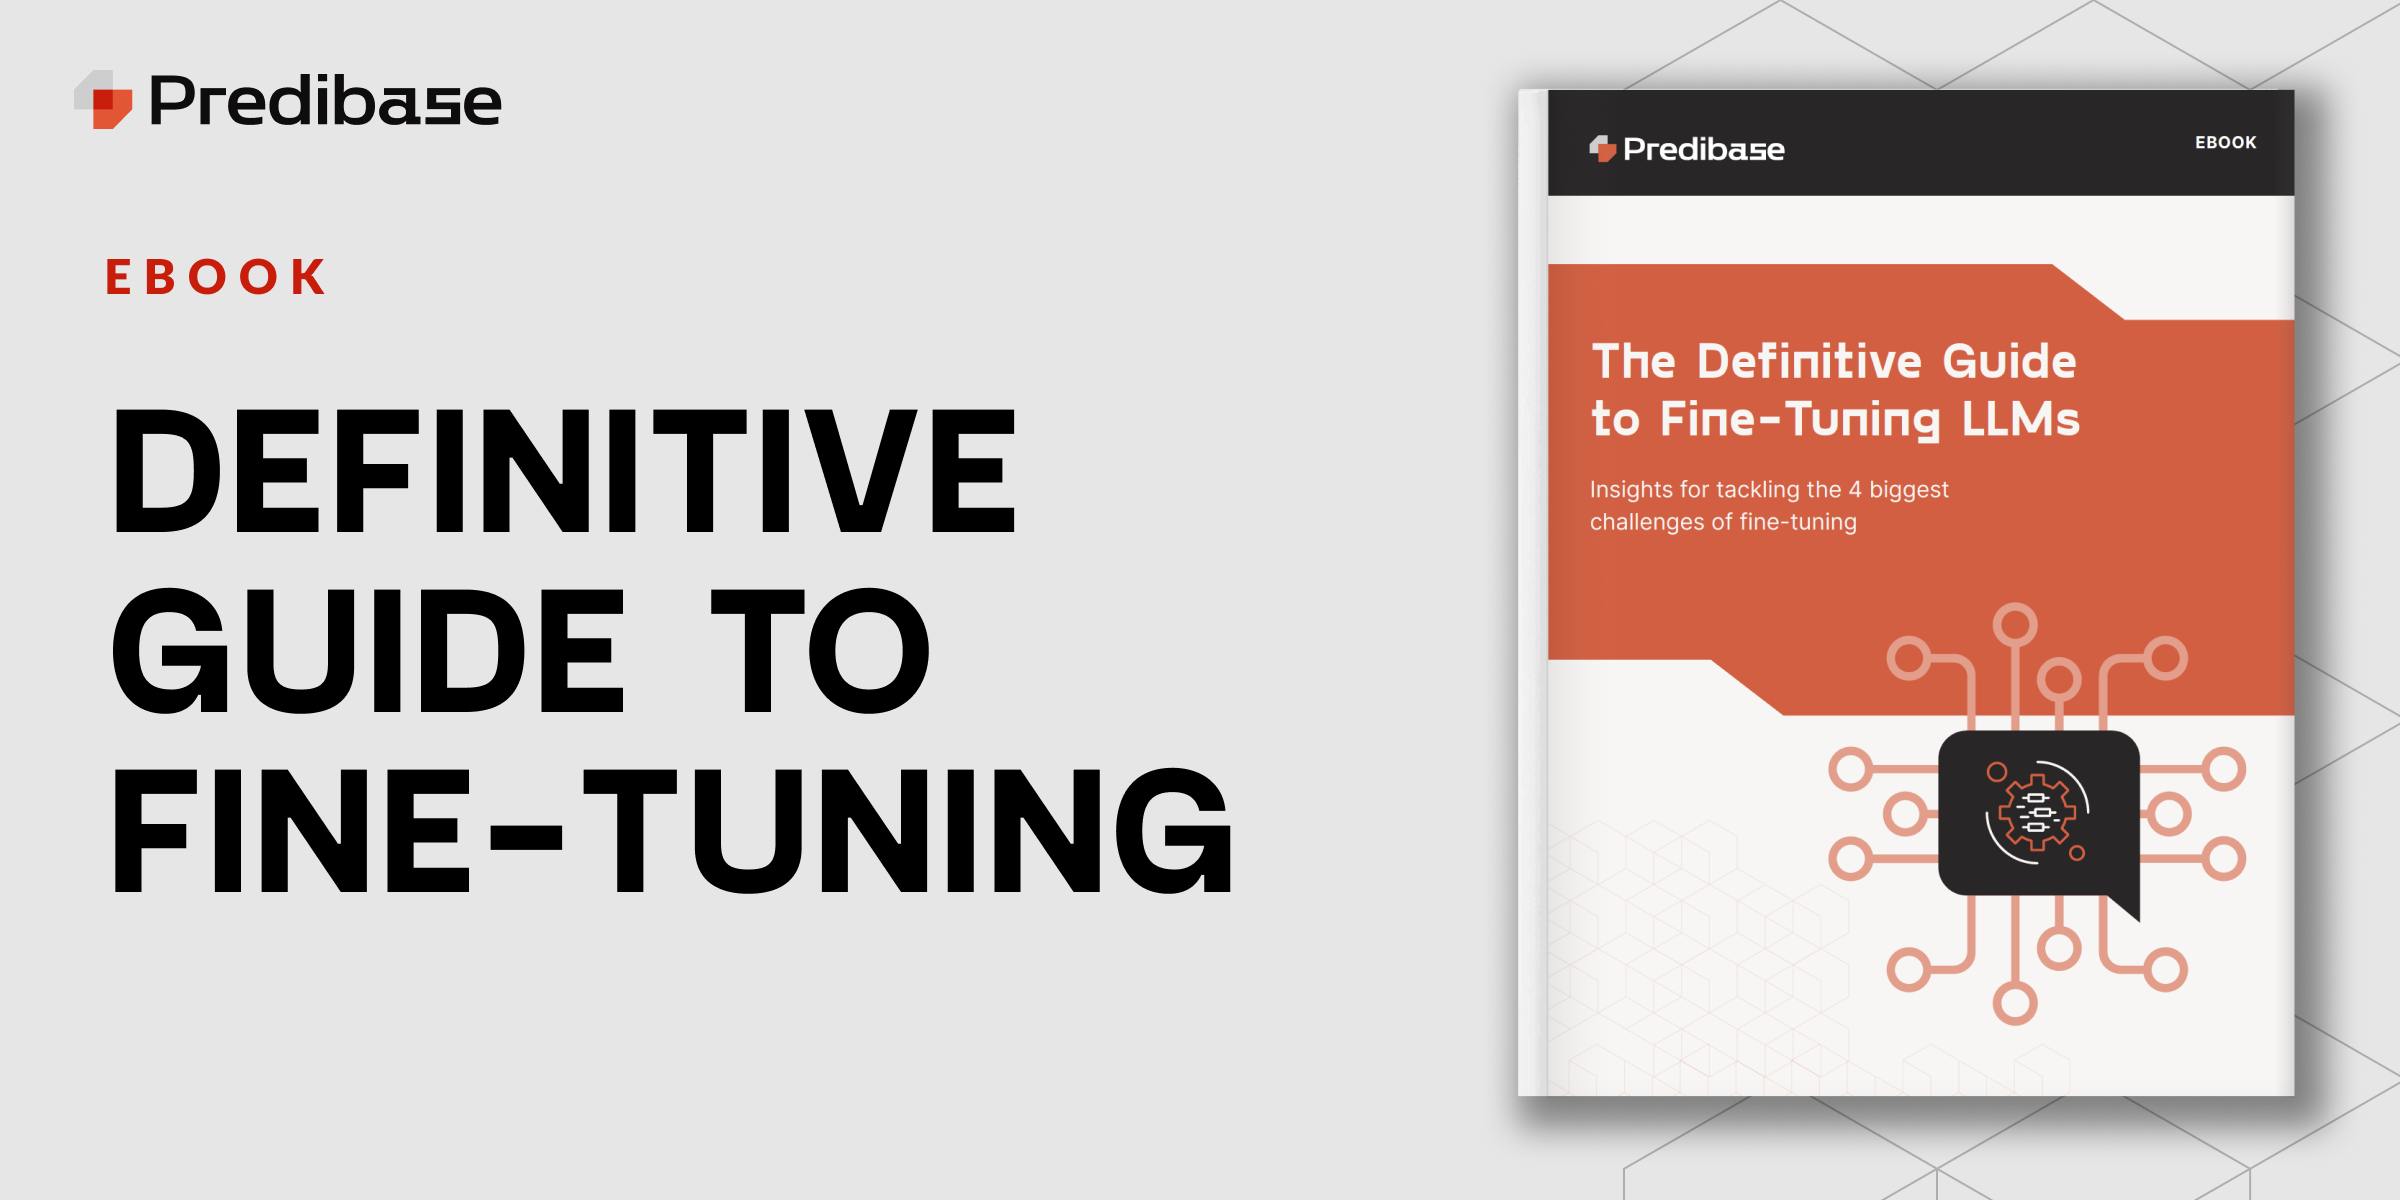 The Definitive Guide to Fine-Tuning LLMs - Insights for tackling the 4 biggest challenges of fine-tuning